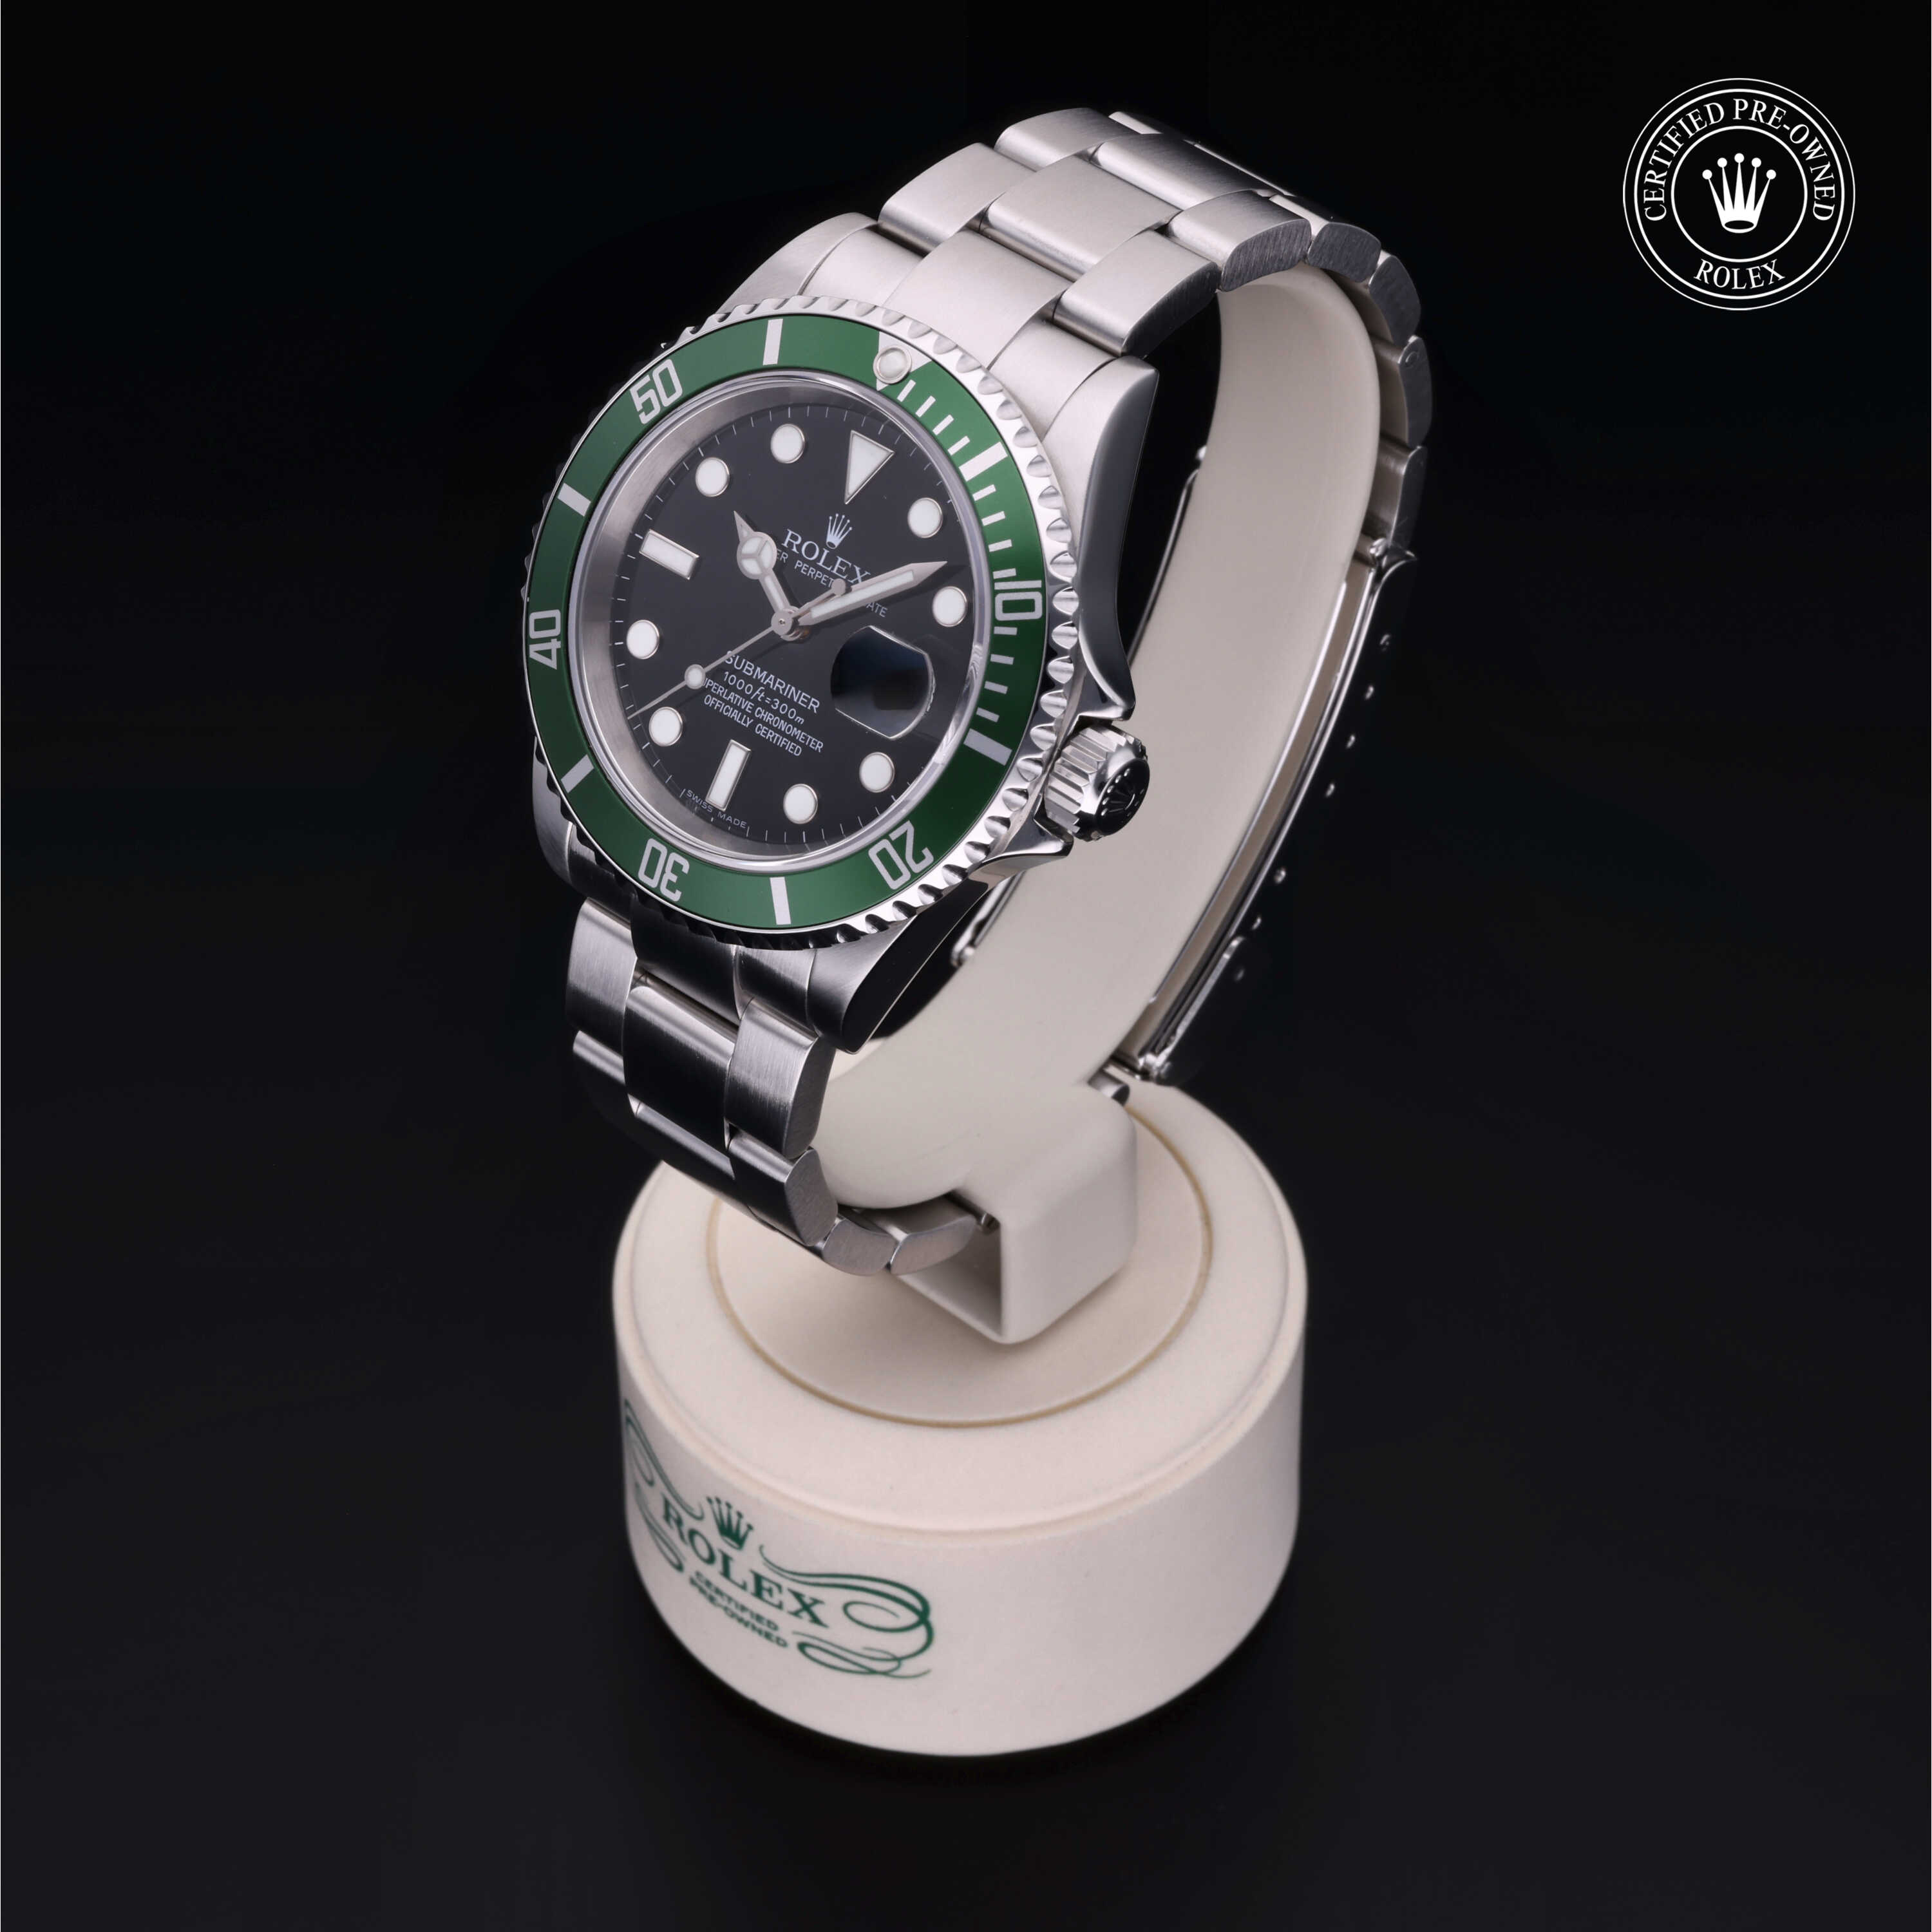 Rolex Certified Pre-Owned Submariner (16610LV)